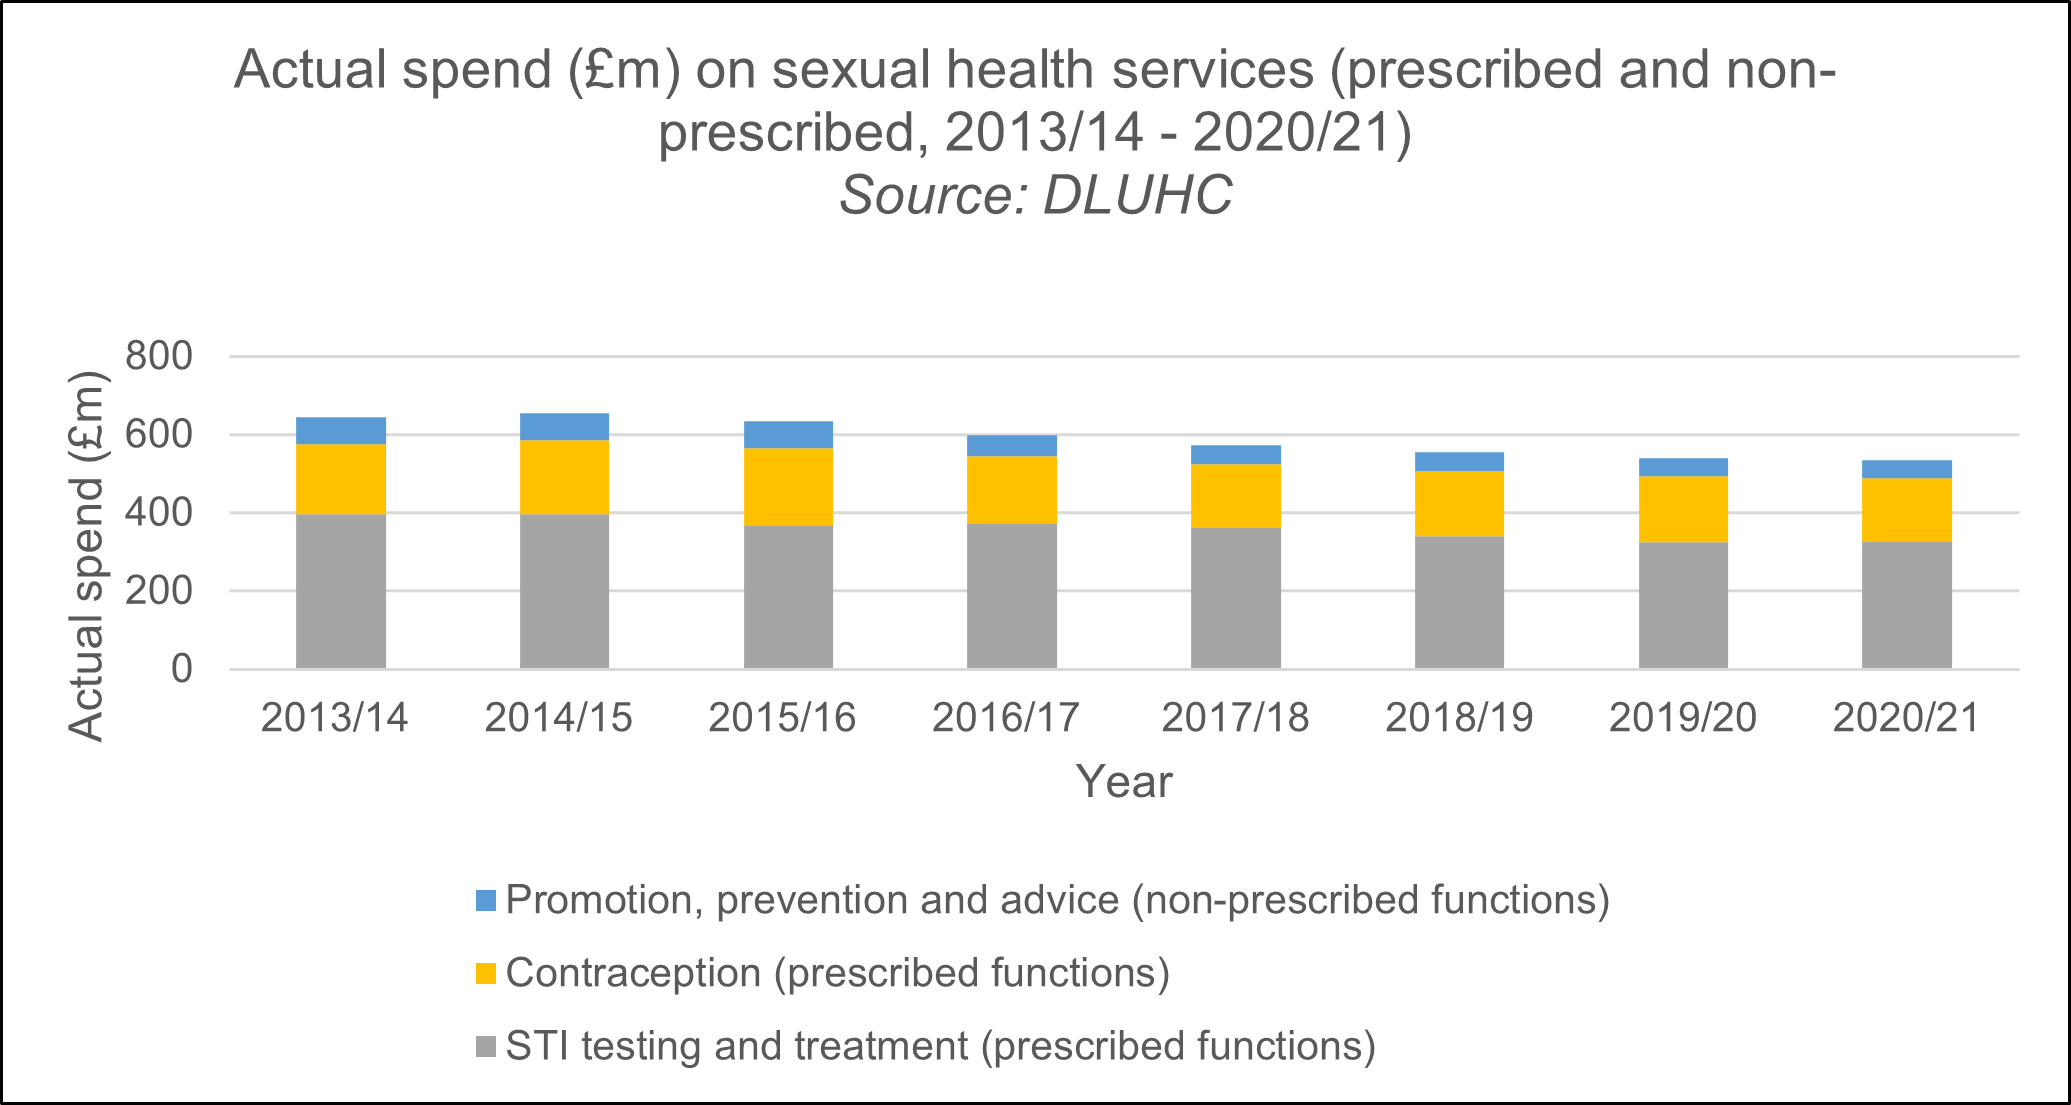 This chart shows actual spend in millions on sexual health services between 2013/14 and 2020/21. It shows a fall in spend from £645 million in 2013/14 to £535 million in 2020/21. For STI testing and treatment (which is a prescribed function), spend decreased from £397.8 million in 2013/14 to £326.5 million in 2020/21. For contraception (which is a prescribed function) spend decreased from £178.6 million in 2013/14 to £161 million in 2020/21.